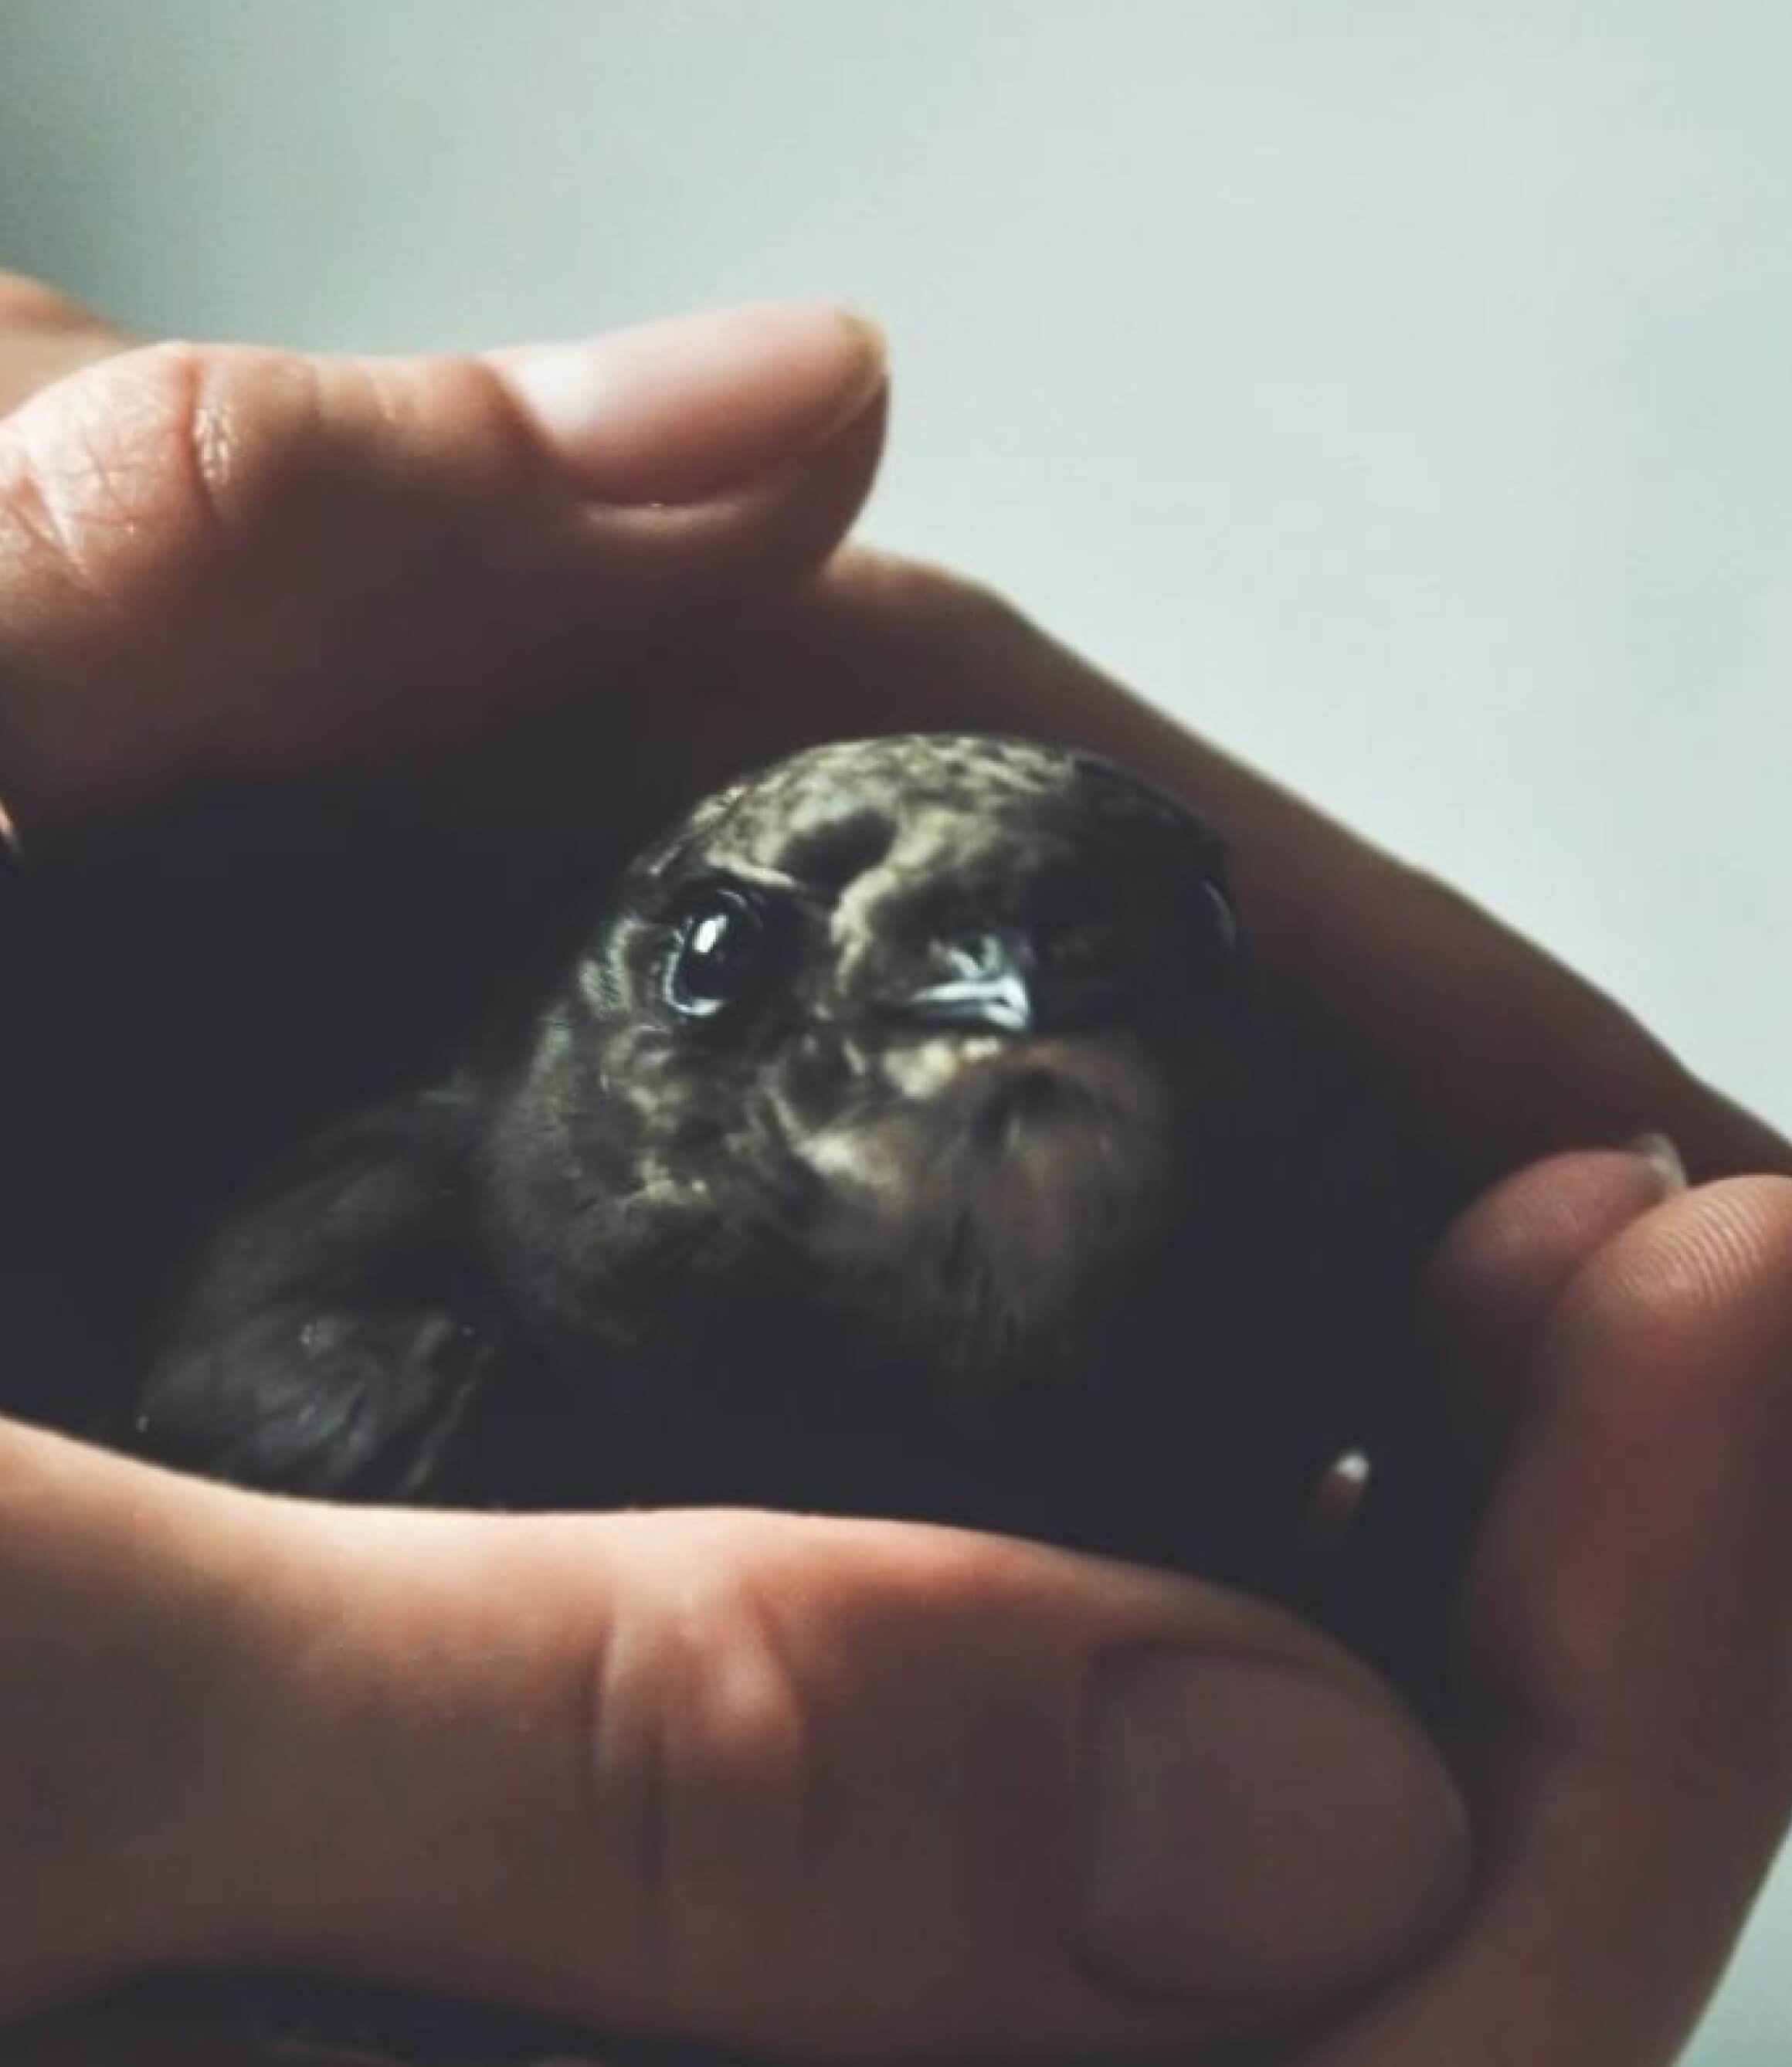 Small black bird in the palm